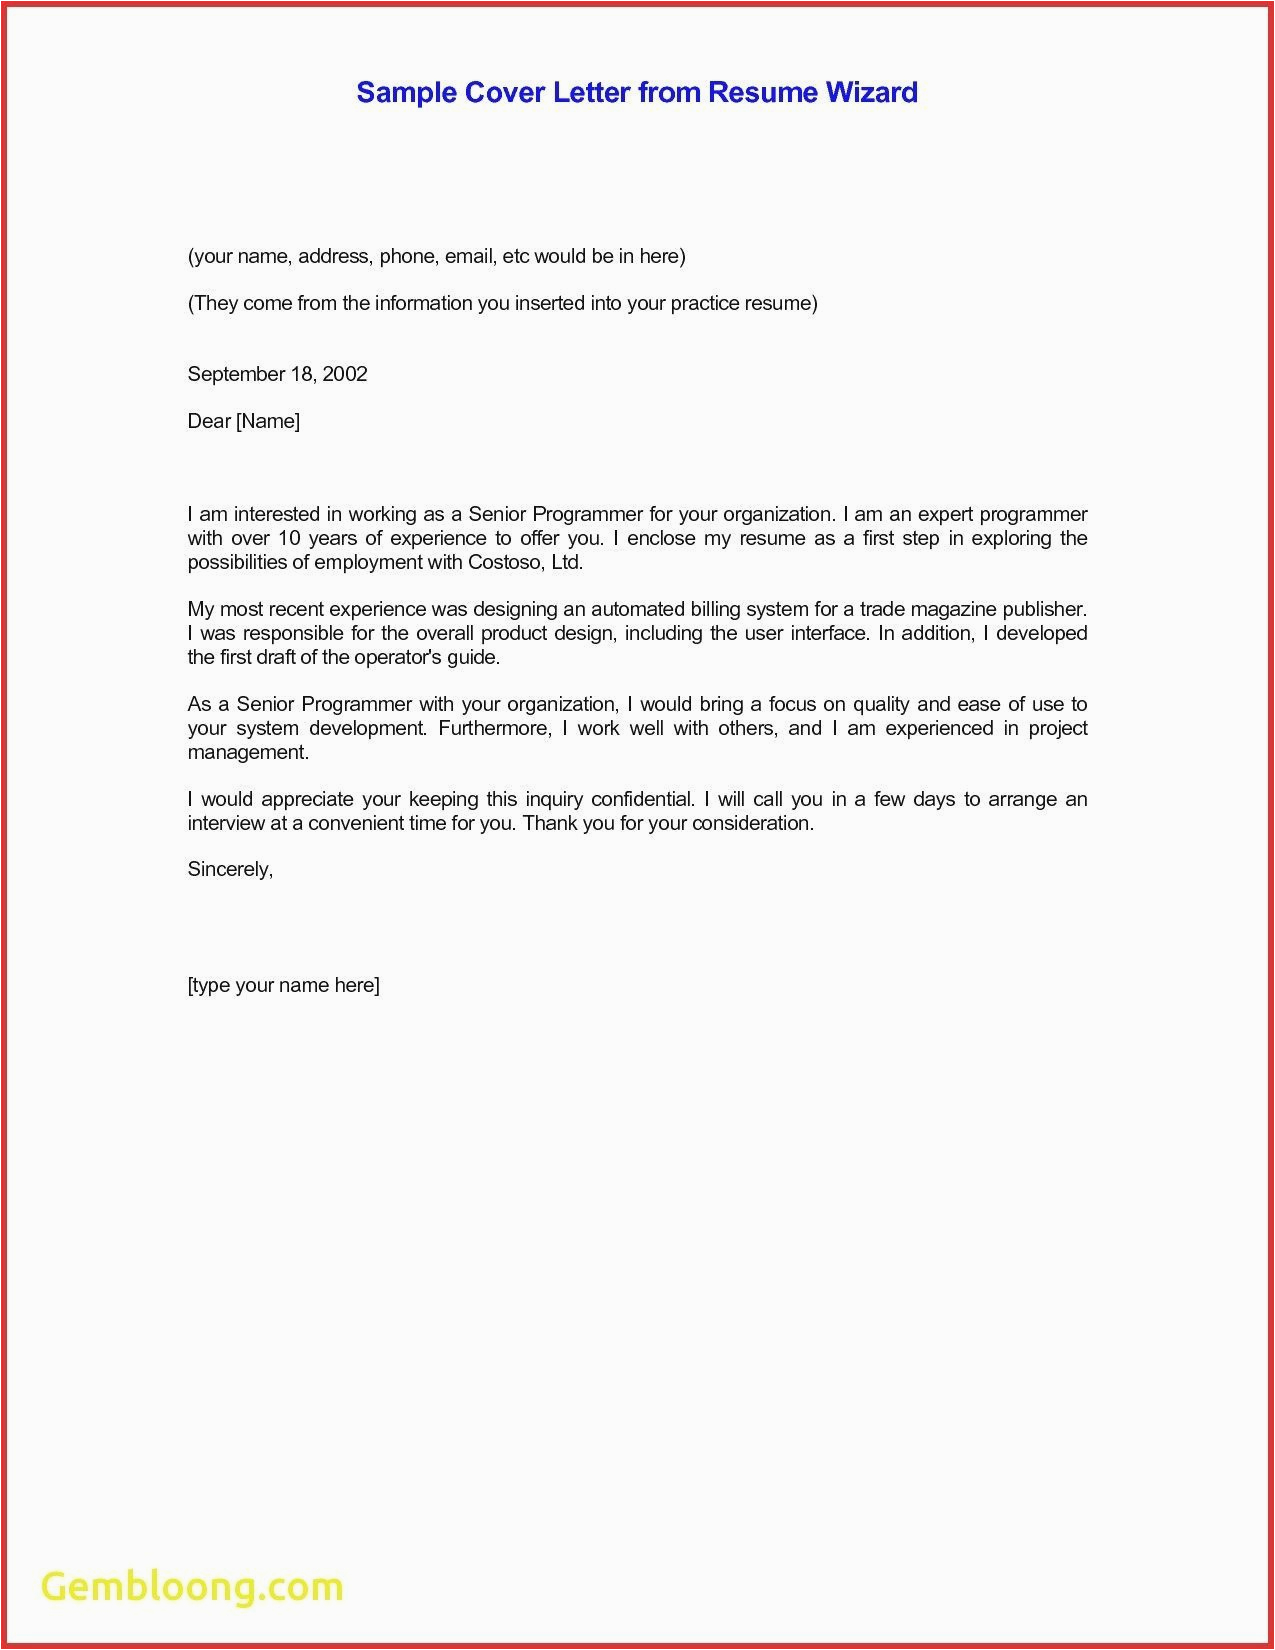 Sample Email Body for Sending Resume and Cover Letter Email Resume Cover Letter Template